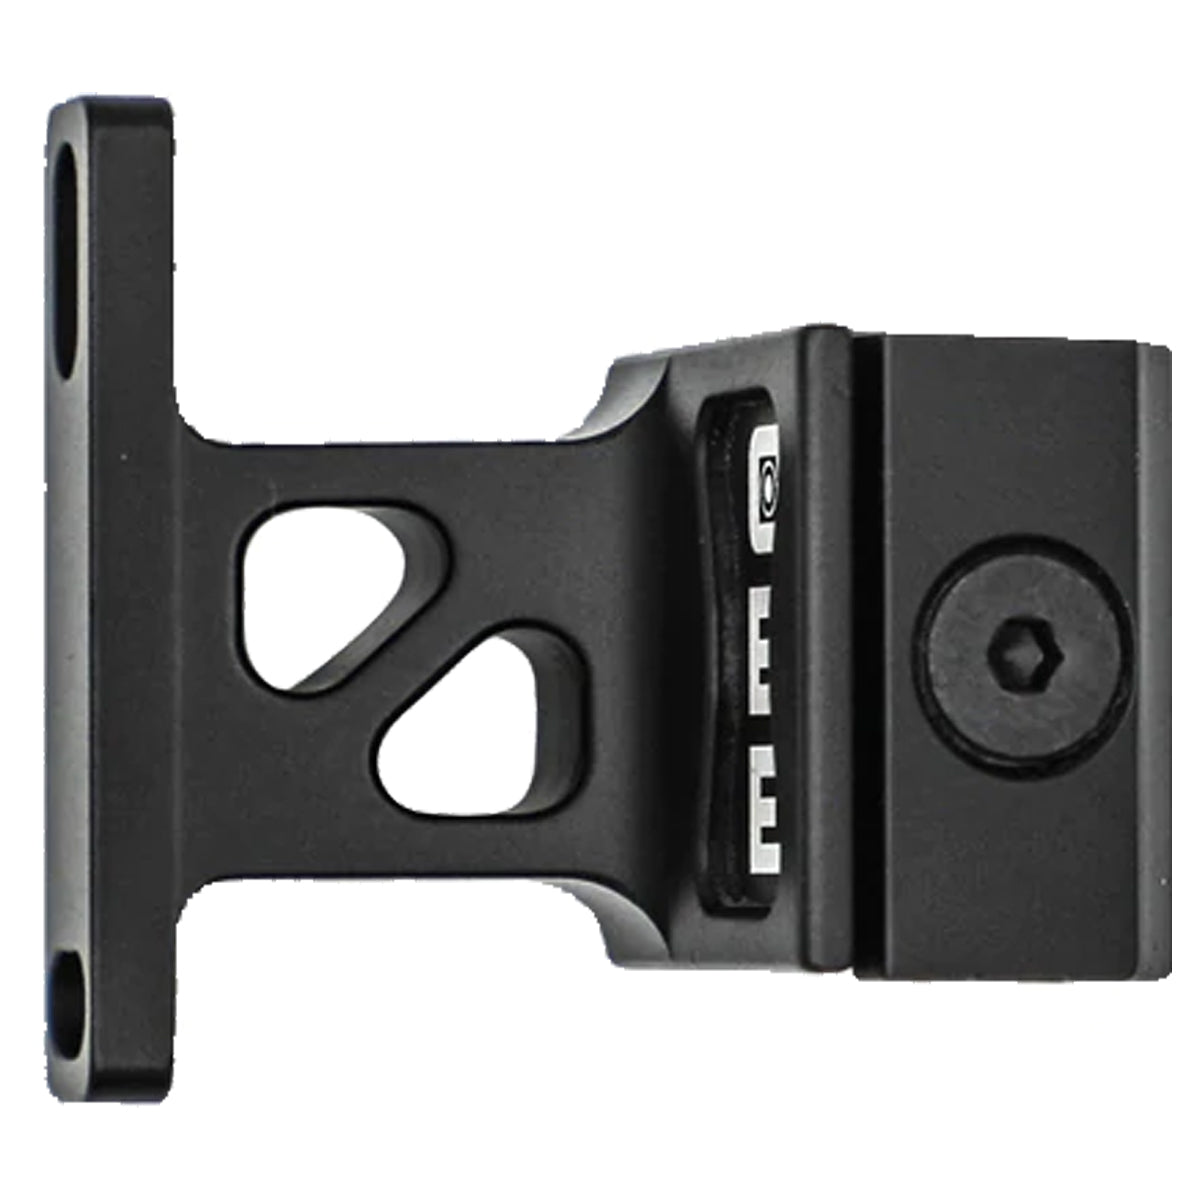 CBE Picatinny Mount Adapter in  by GOHUNT | CBE - GOHUNT Shop